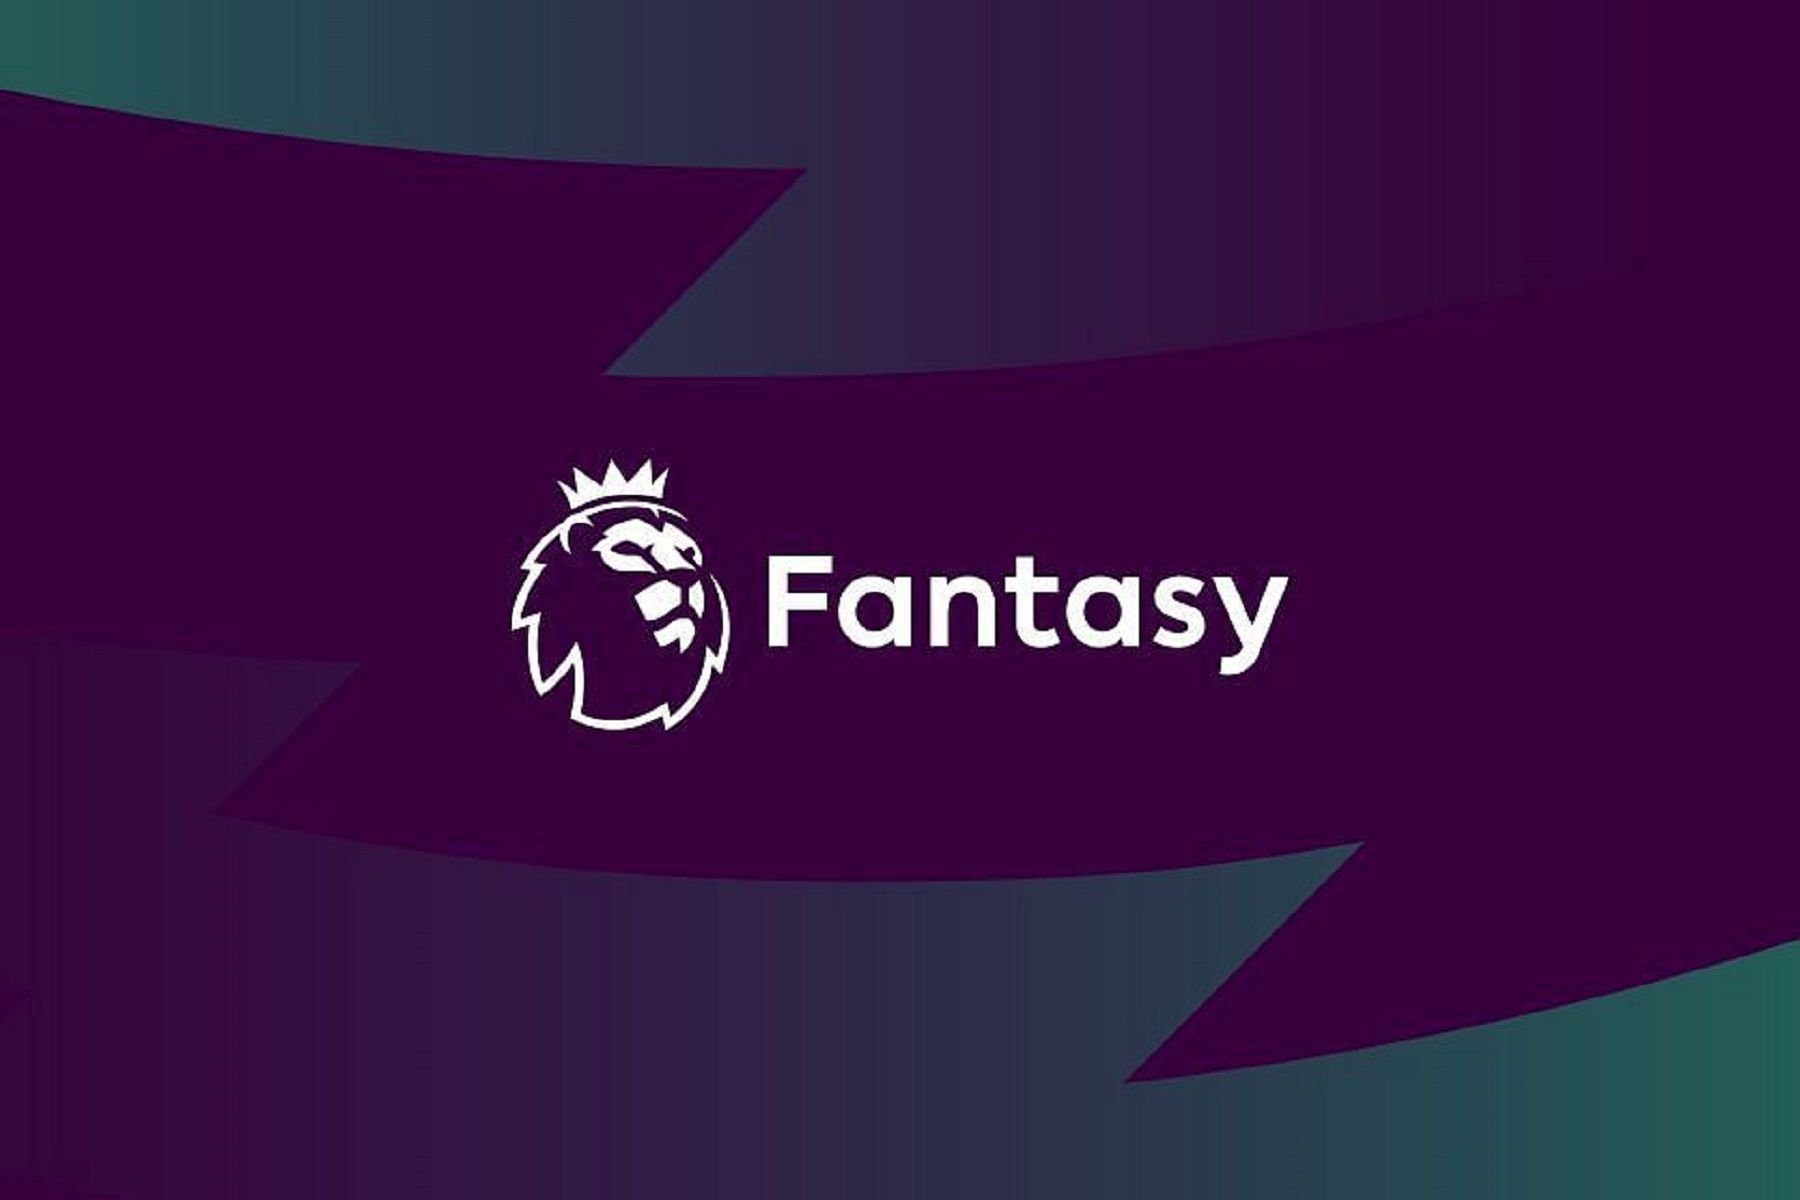 With an extra Free Hit provided to FPL managers, is it a no-brainer to play the chip in GW 19? (Image Courtesy: premierleague.com)